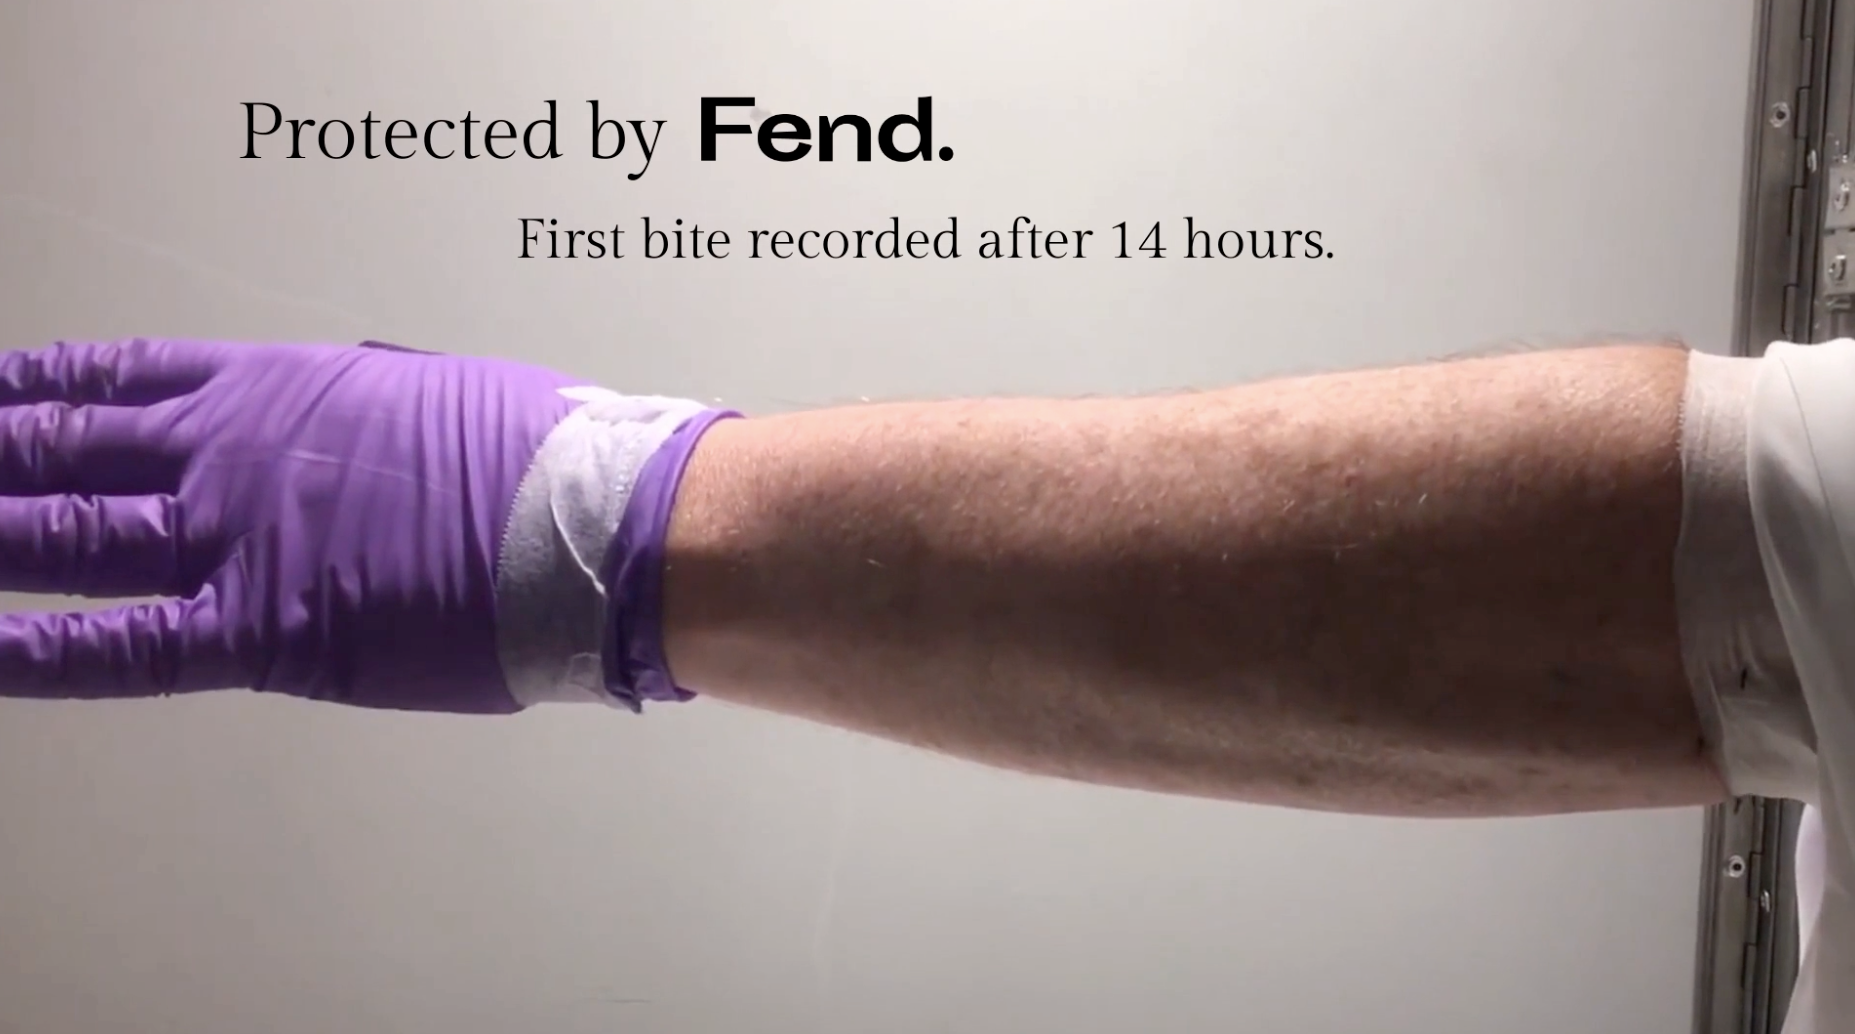 Load video: Fend arm in cage video